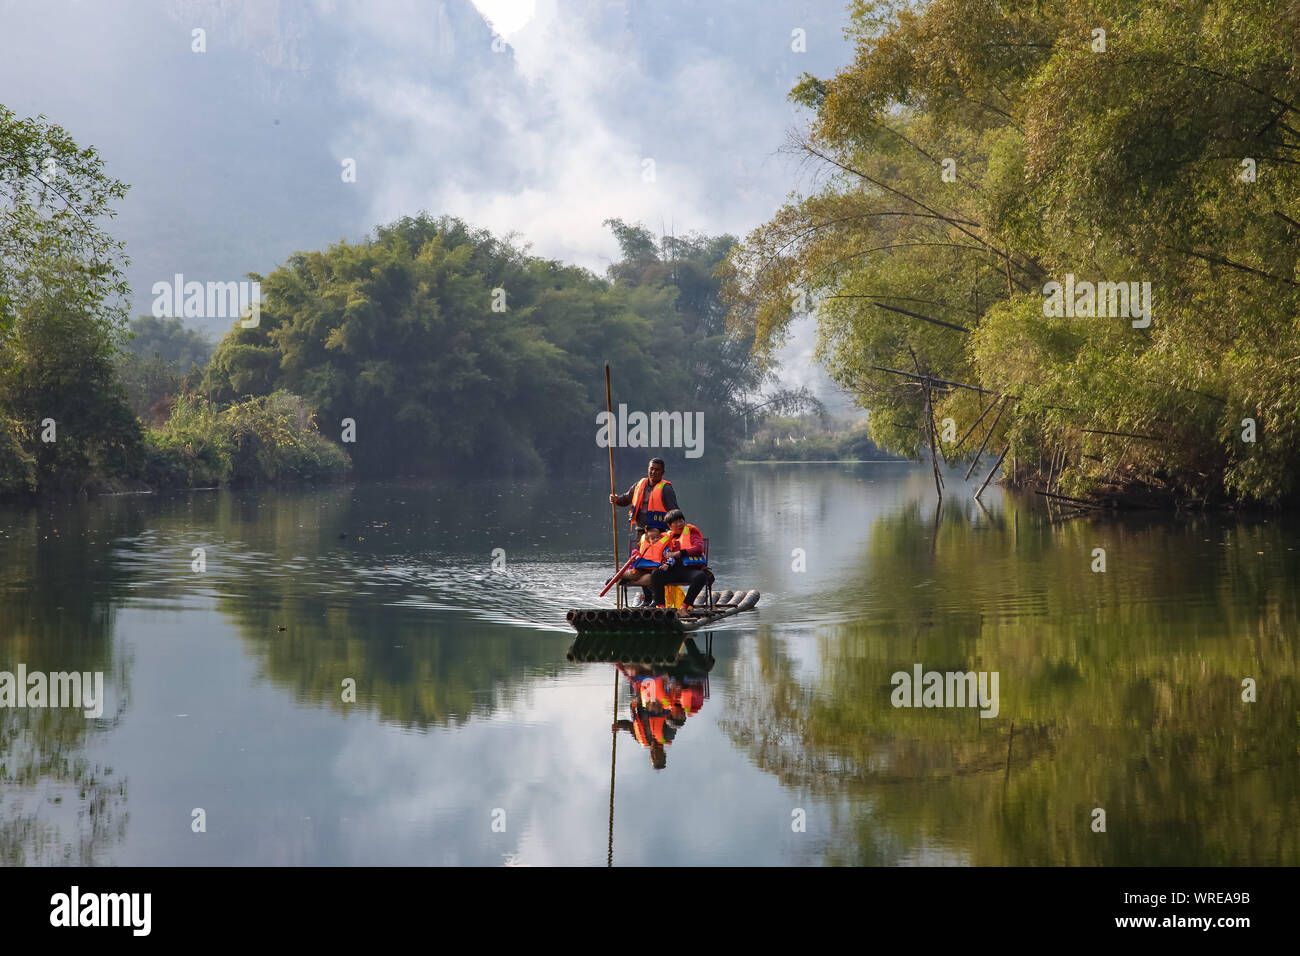 Amazing natural landscape. Beautiful karst mountains reflected in the water of Yulong river, in Yangshuo, Guangxi province, China. Stock Photo